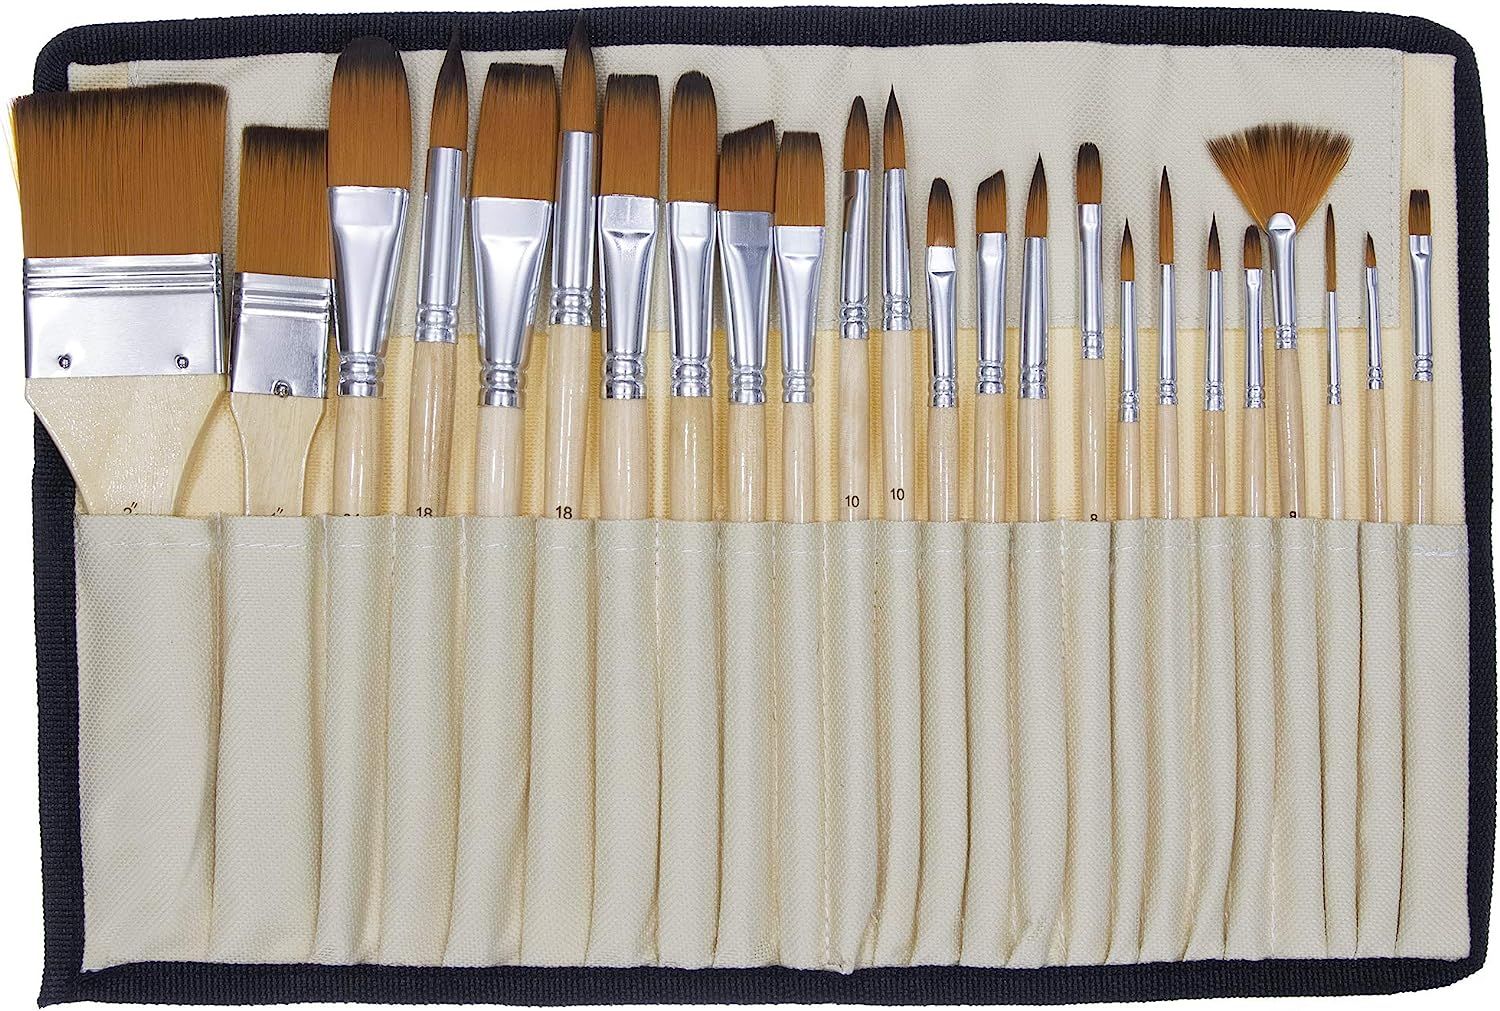 Jerry Q Art 24 Pcs Artist Paint Brush Set with Free Carry Pouch for Watercolor, Acrylic, Oil and ... | Amazon (US)